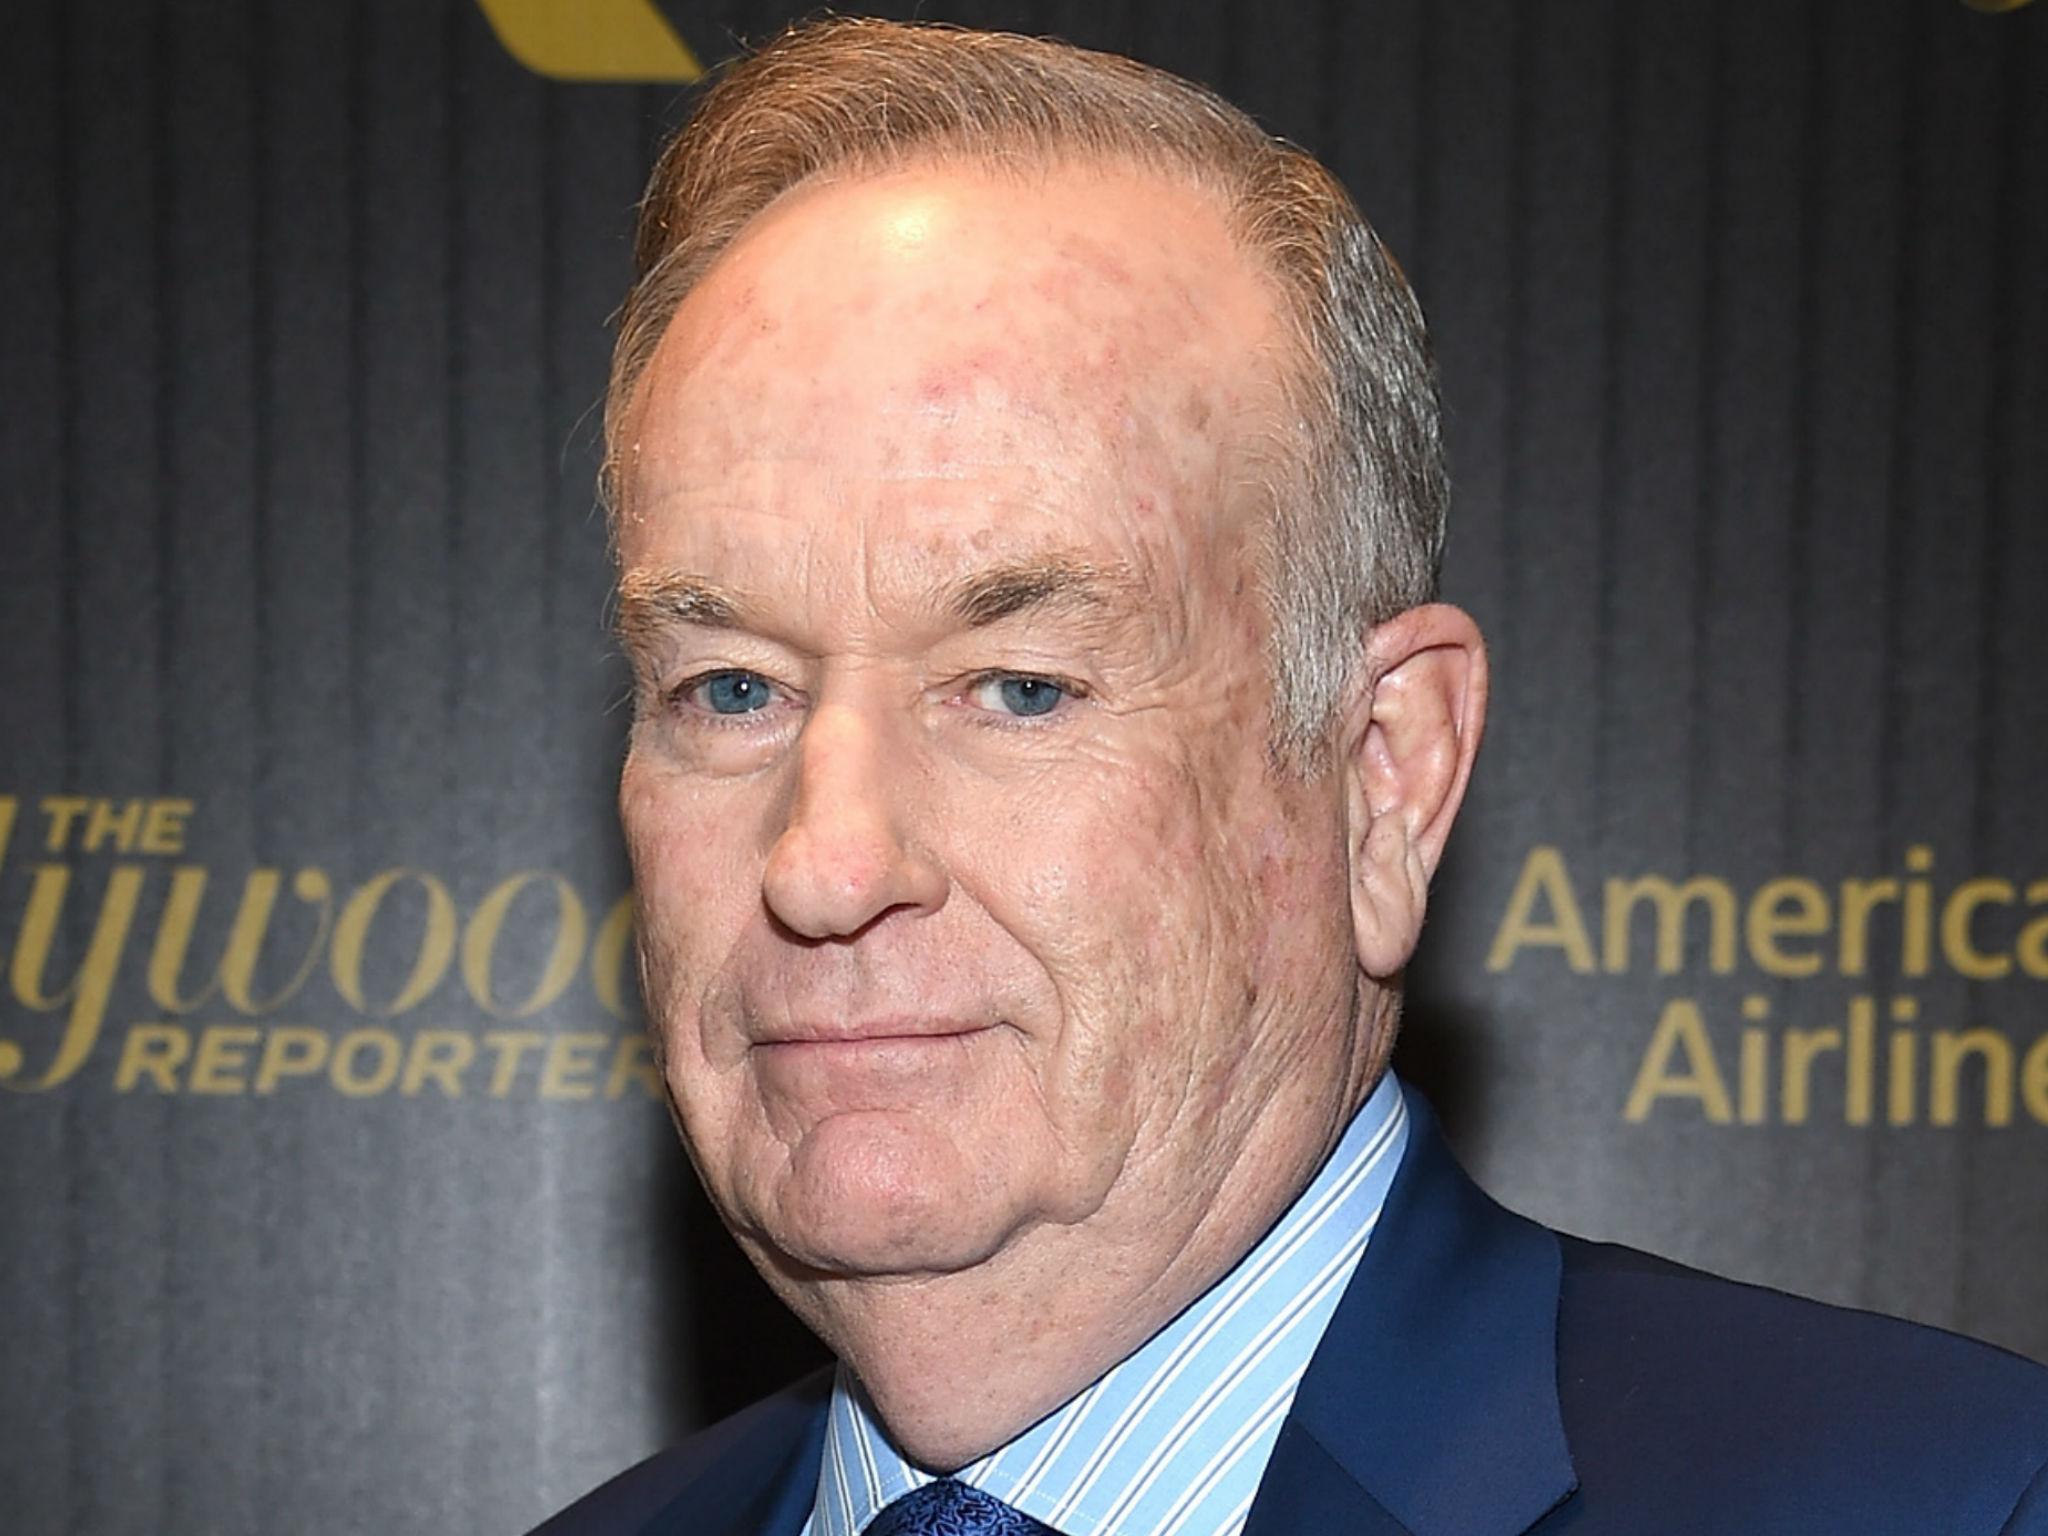 Bill O'Reilly attends The Hollywood Reporter's 5th Annual 35 Most Powerful People in New York Media on April 6, 2016 in New York City